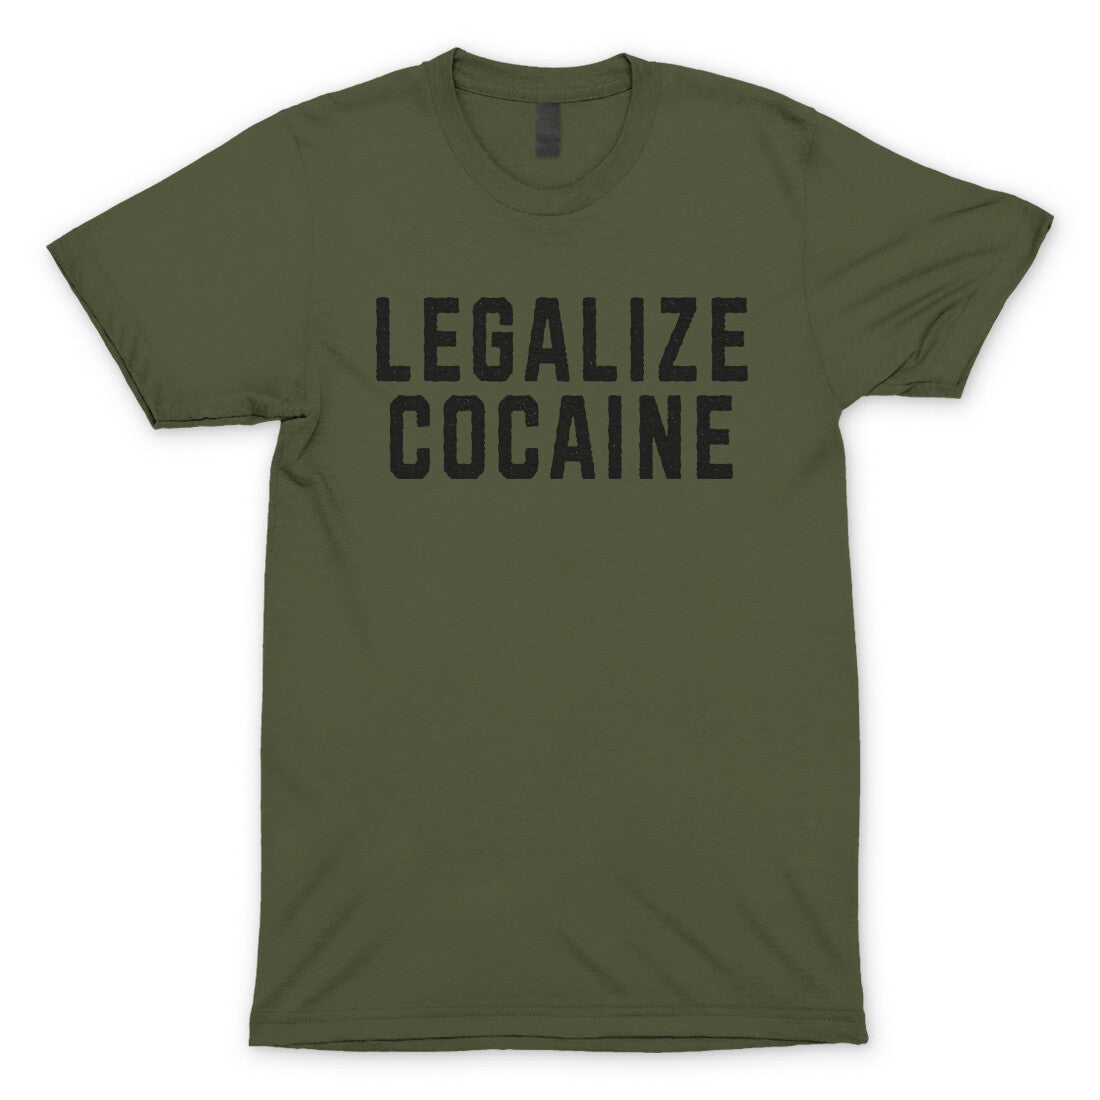 Legalize Cocaine in Military Green Color